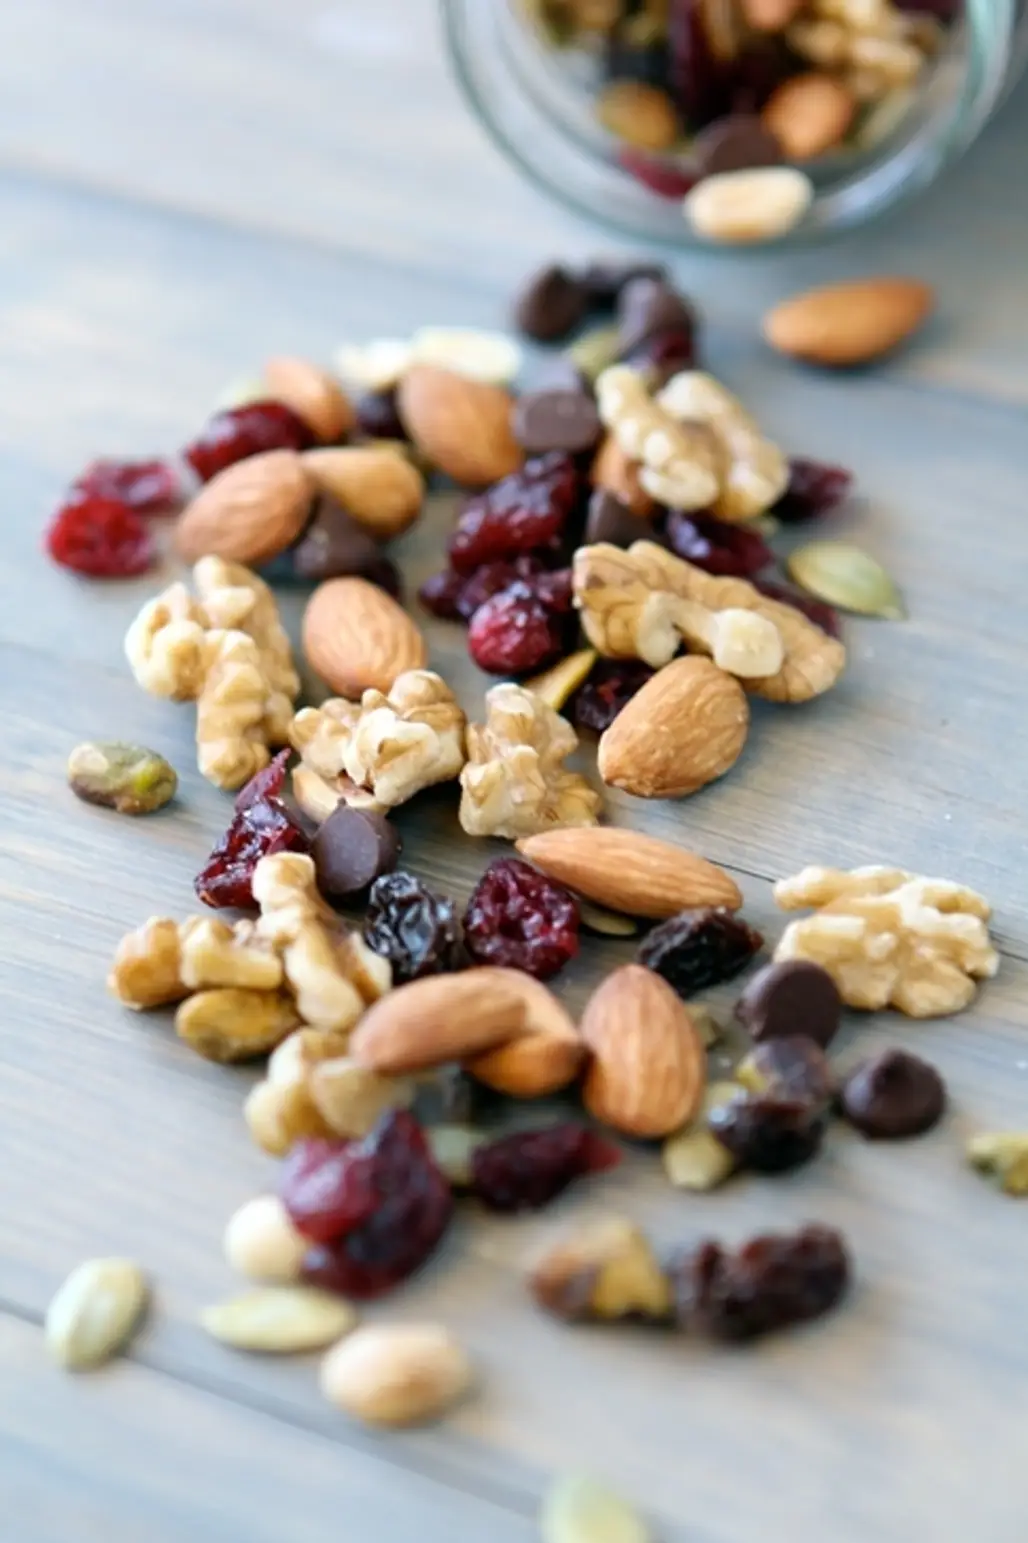 Dried Fruit or Trail Mix